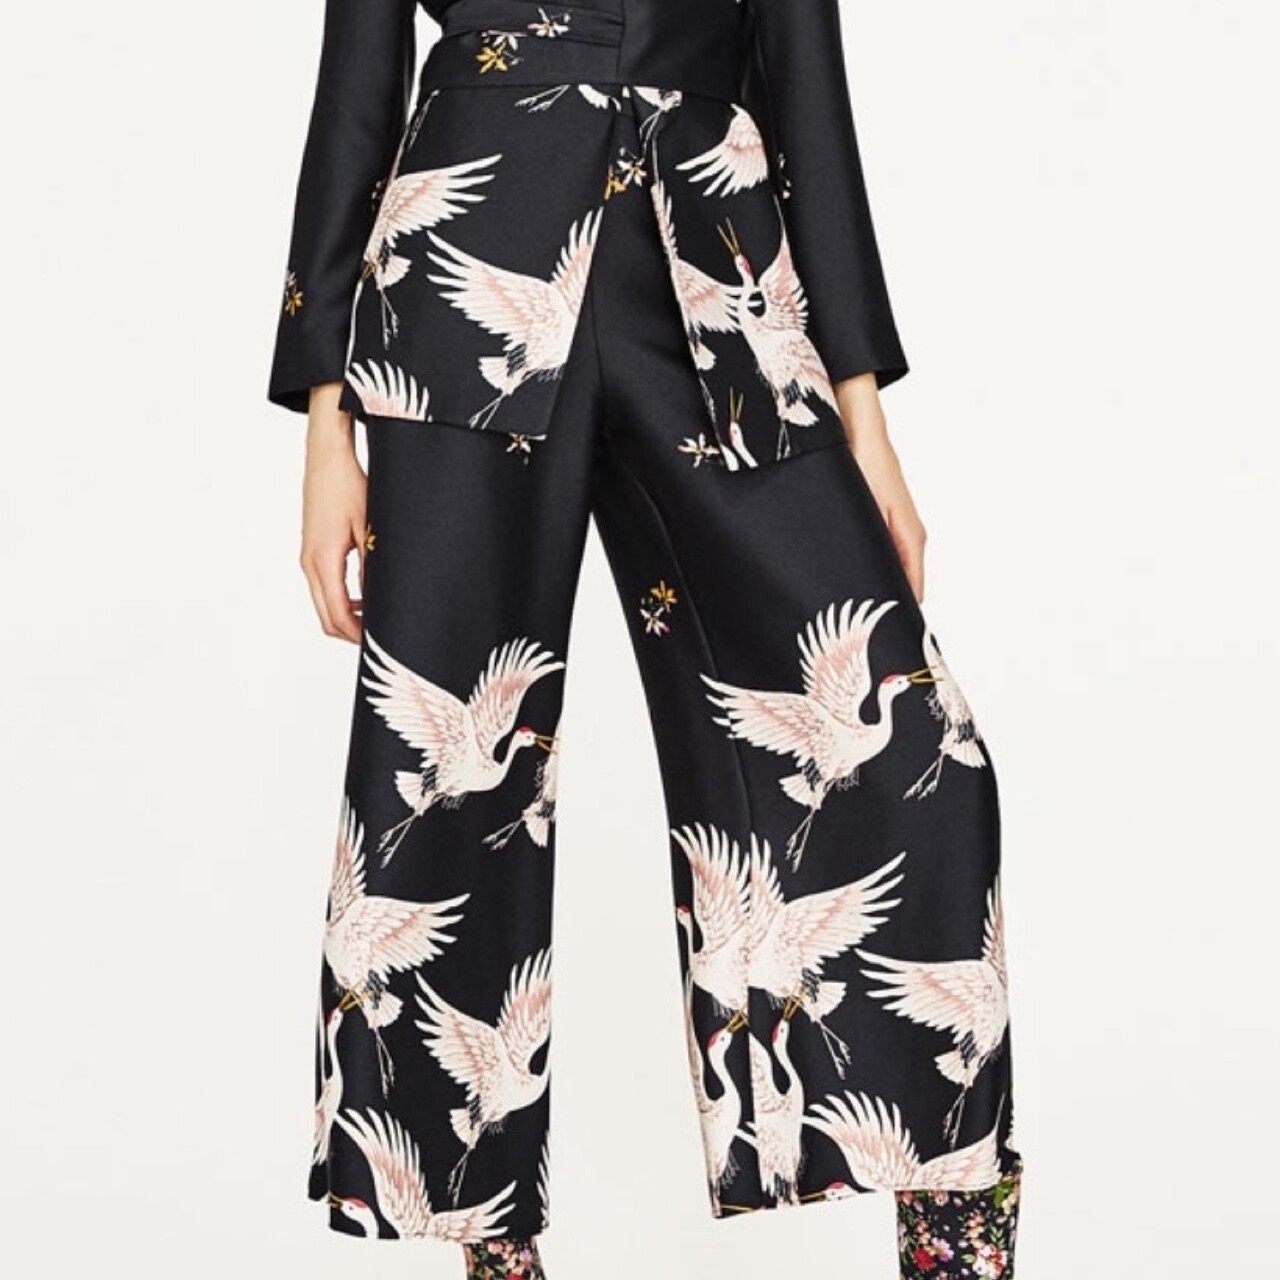 Zara |Birds Cullotes Trousers Cropped Palazzo XS new NEW